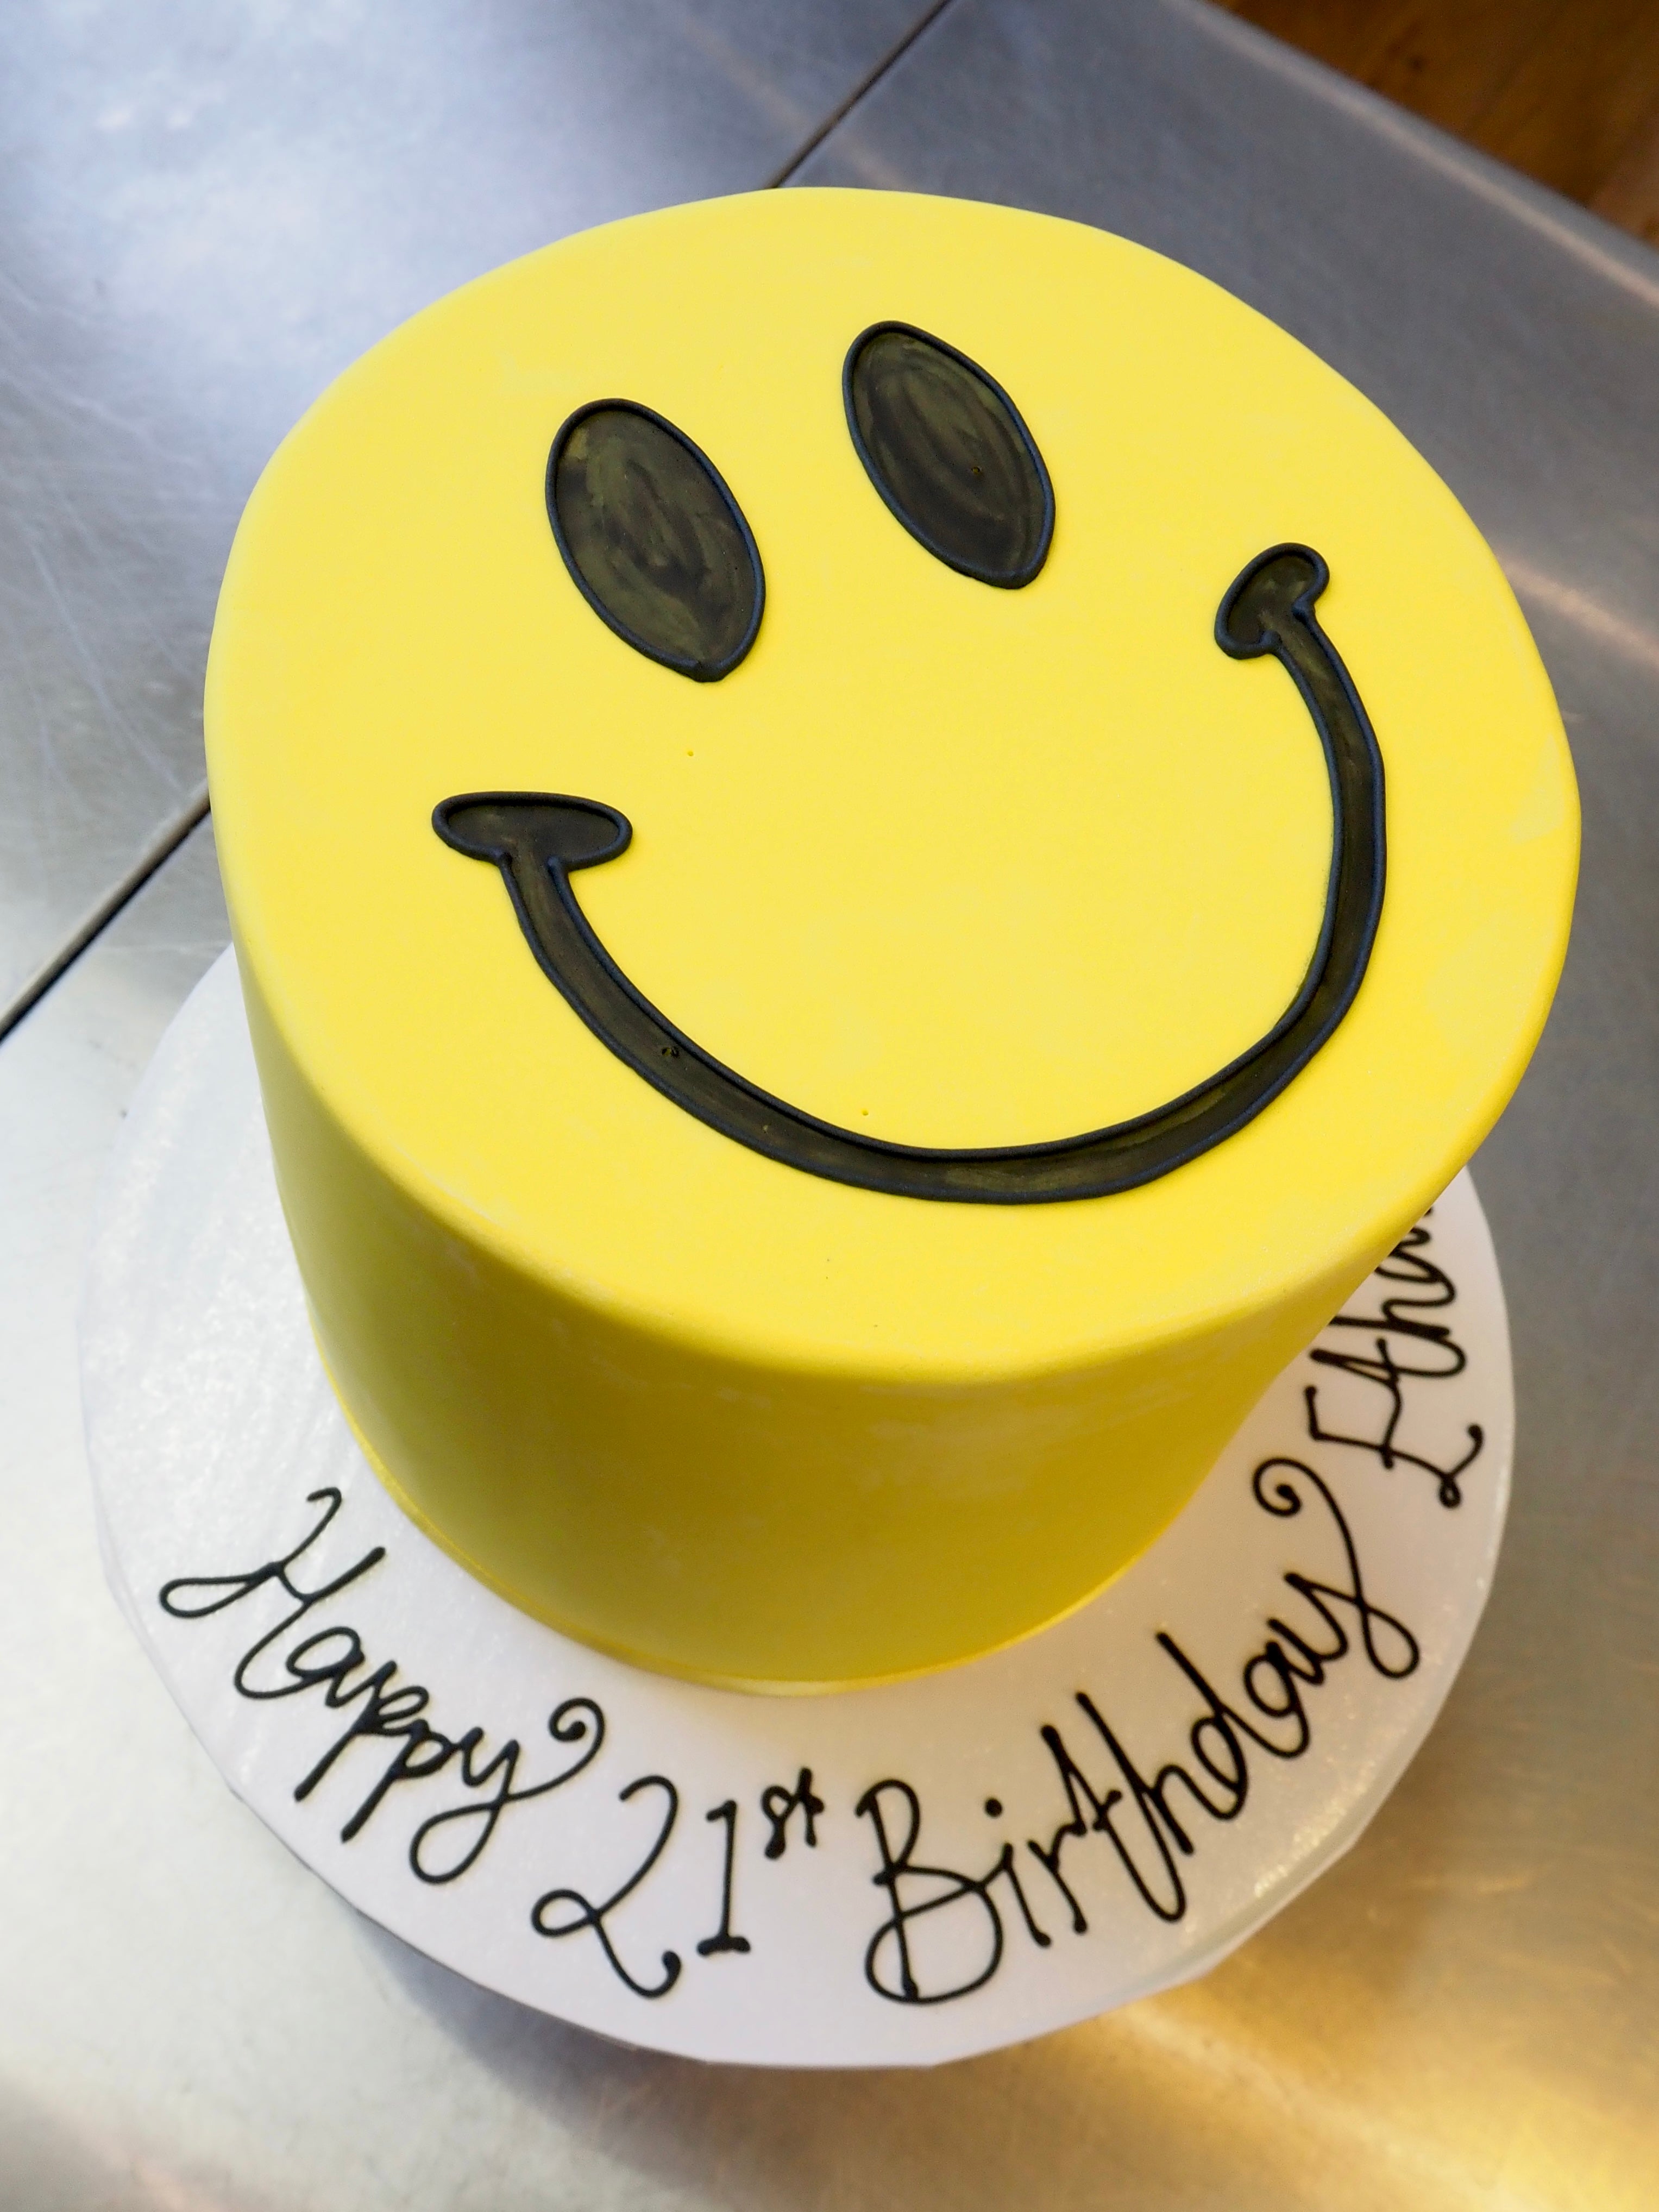 Acrylic Happy Dude Cake Topper - Smiley Face Banner for 1st Birthday  Decorations,One Happy Dude Birthday Party Decorations,Cool Dude 1st Birthday  Party Cake Topper,Gold Mirror Smiley First Cake Topper : Amazon.ae: Kitchen